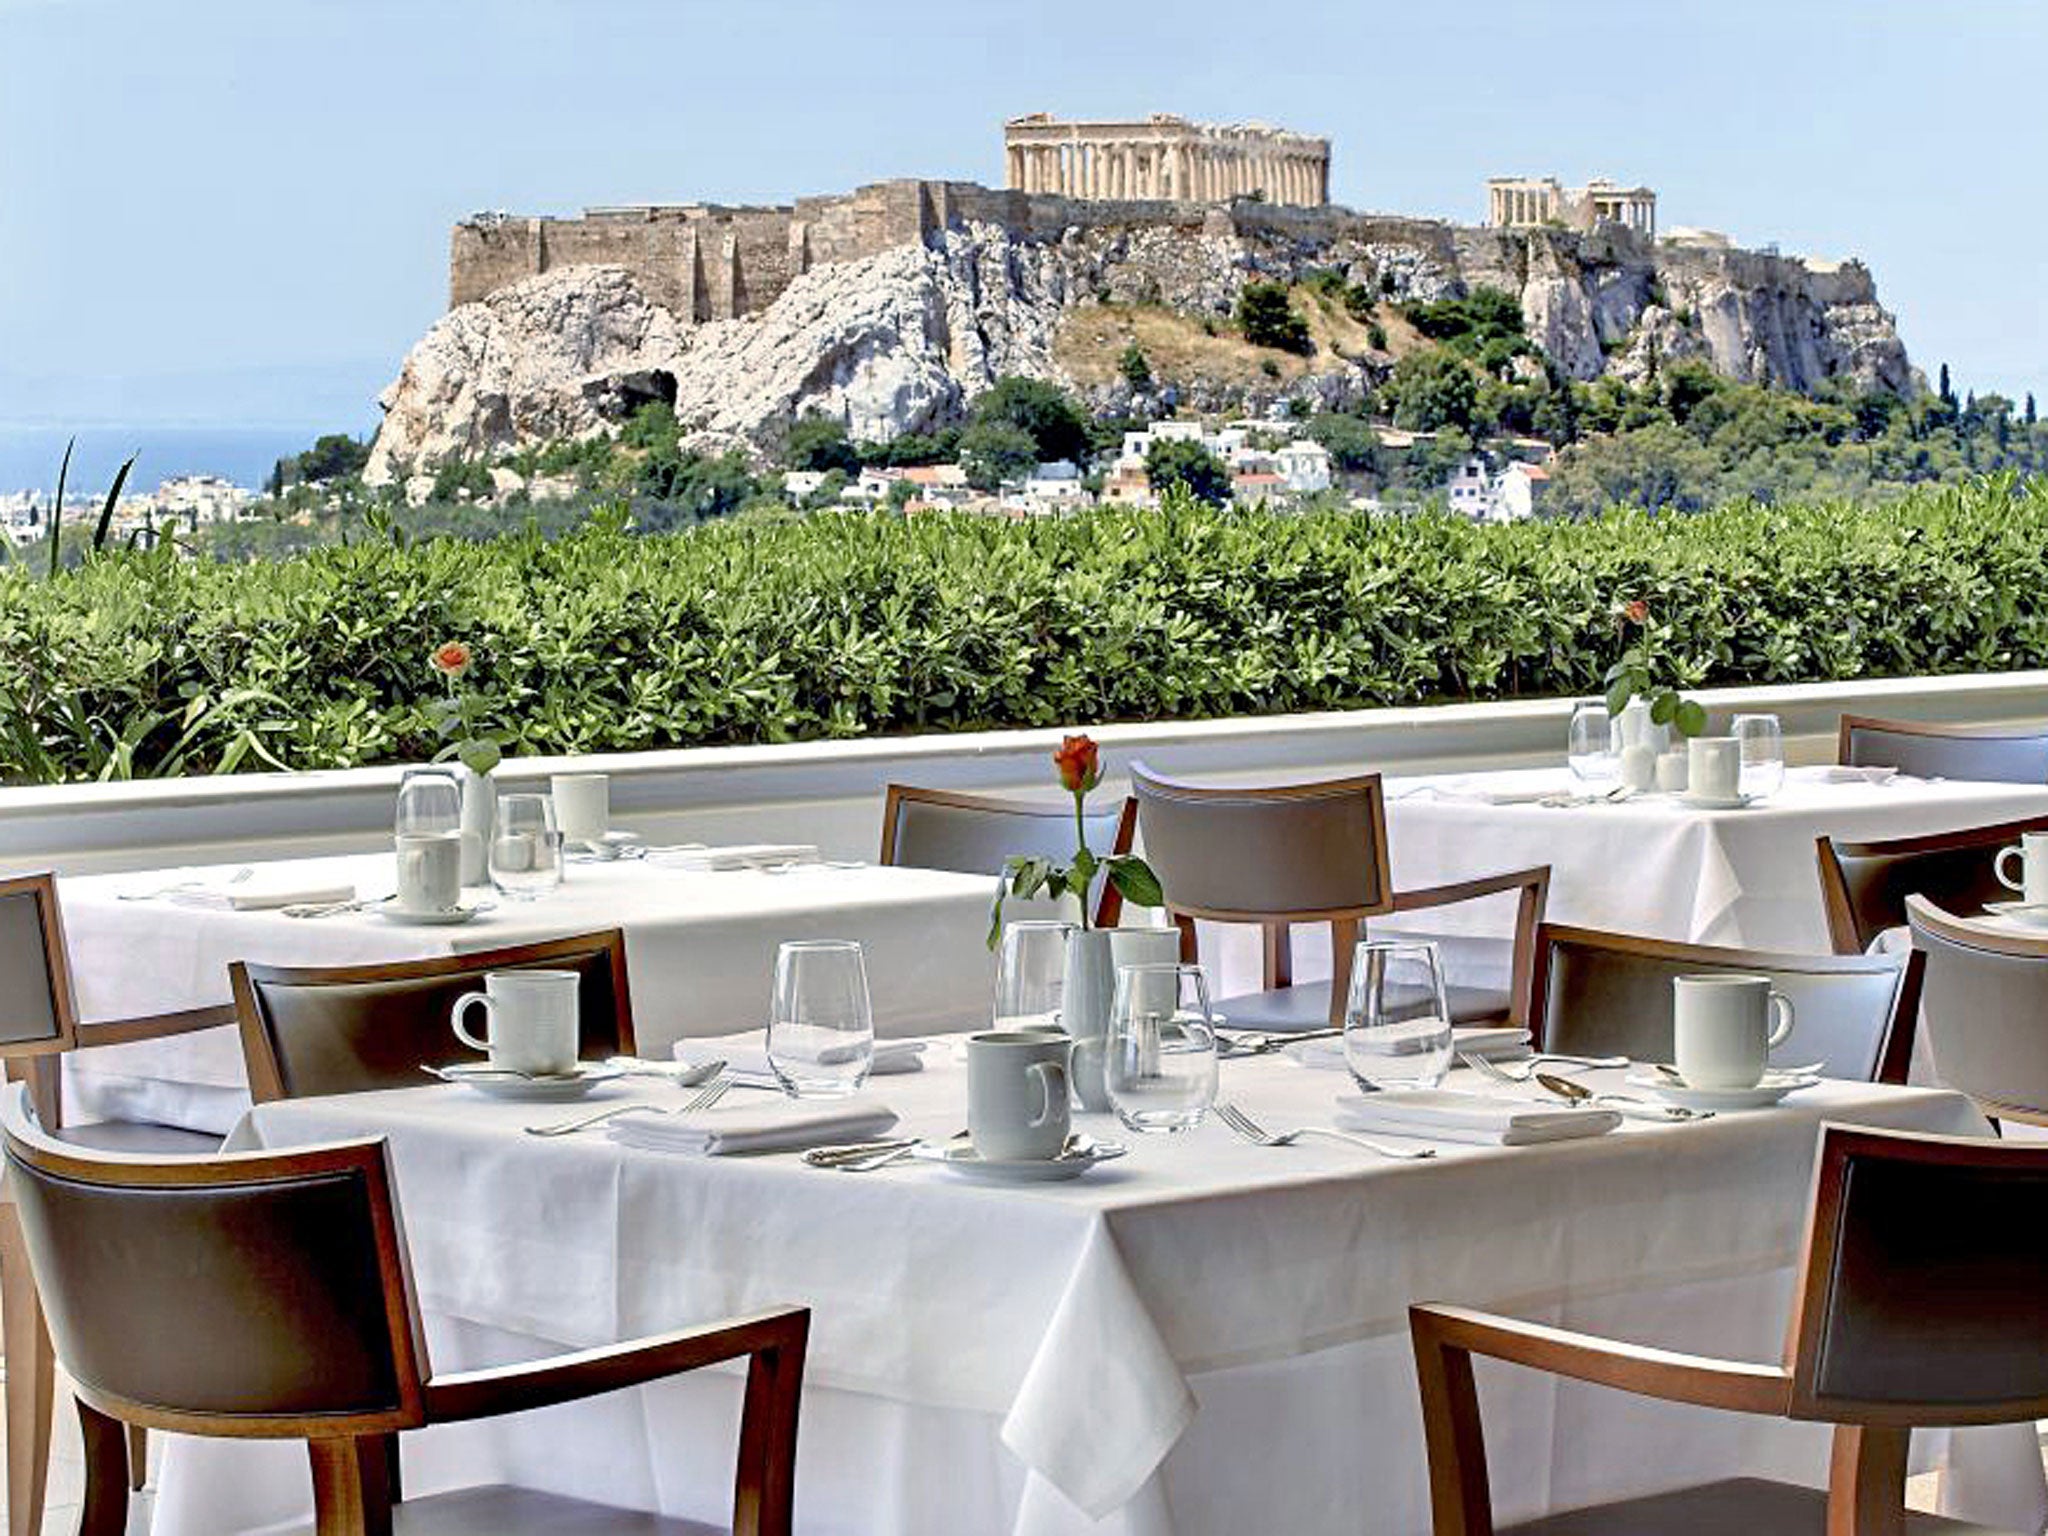 High class: Acropolis view from the Grand Hotel Bretagne